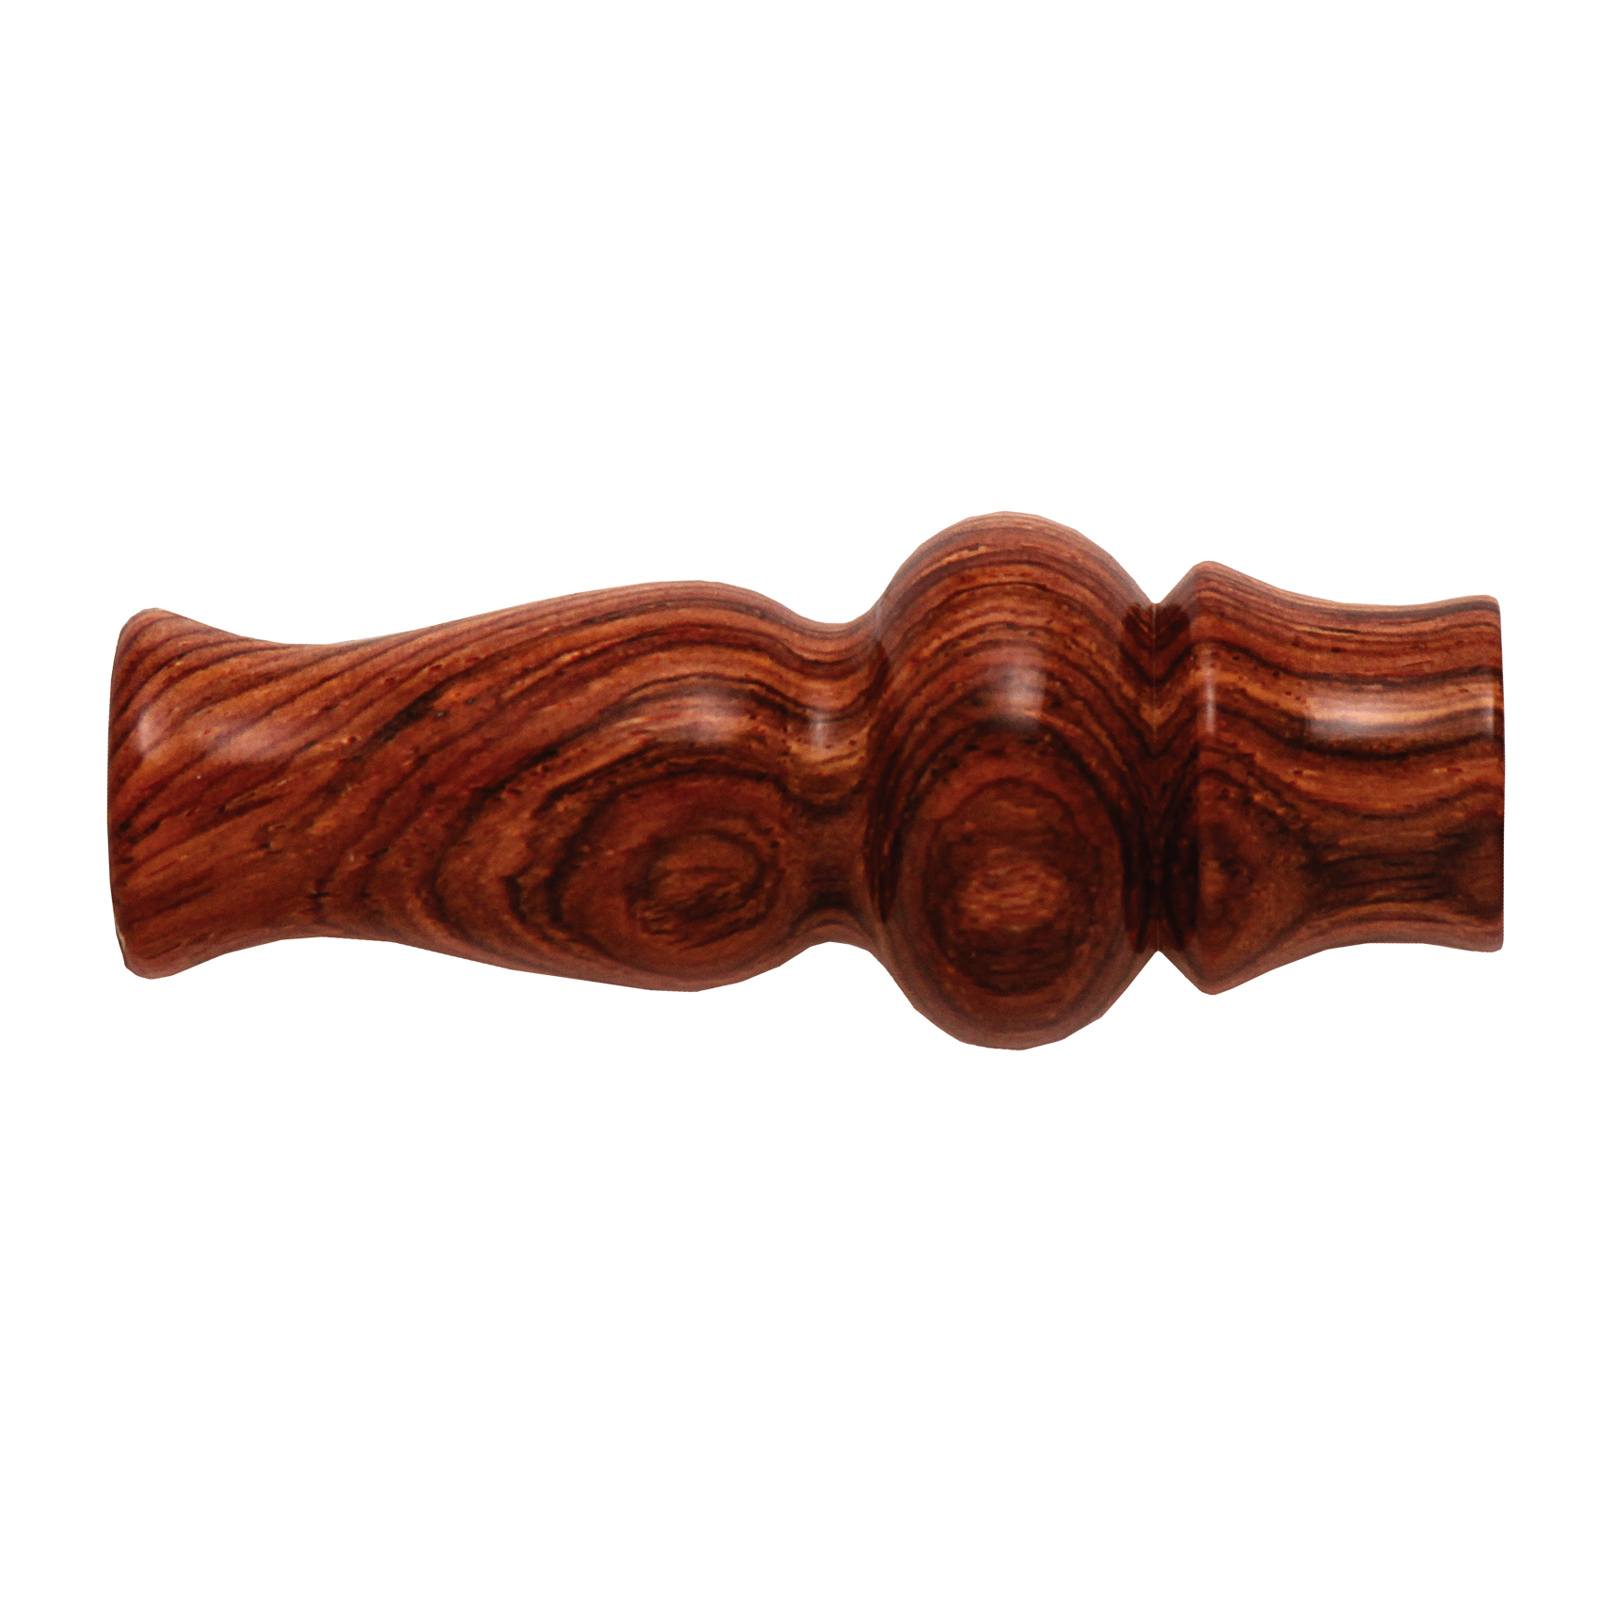 DUCK CALL BAND 3/8" WIDE INLAY COCOBOLO STAINLESS 2-PACK SUPER HIGH QUALITY!! 